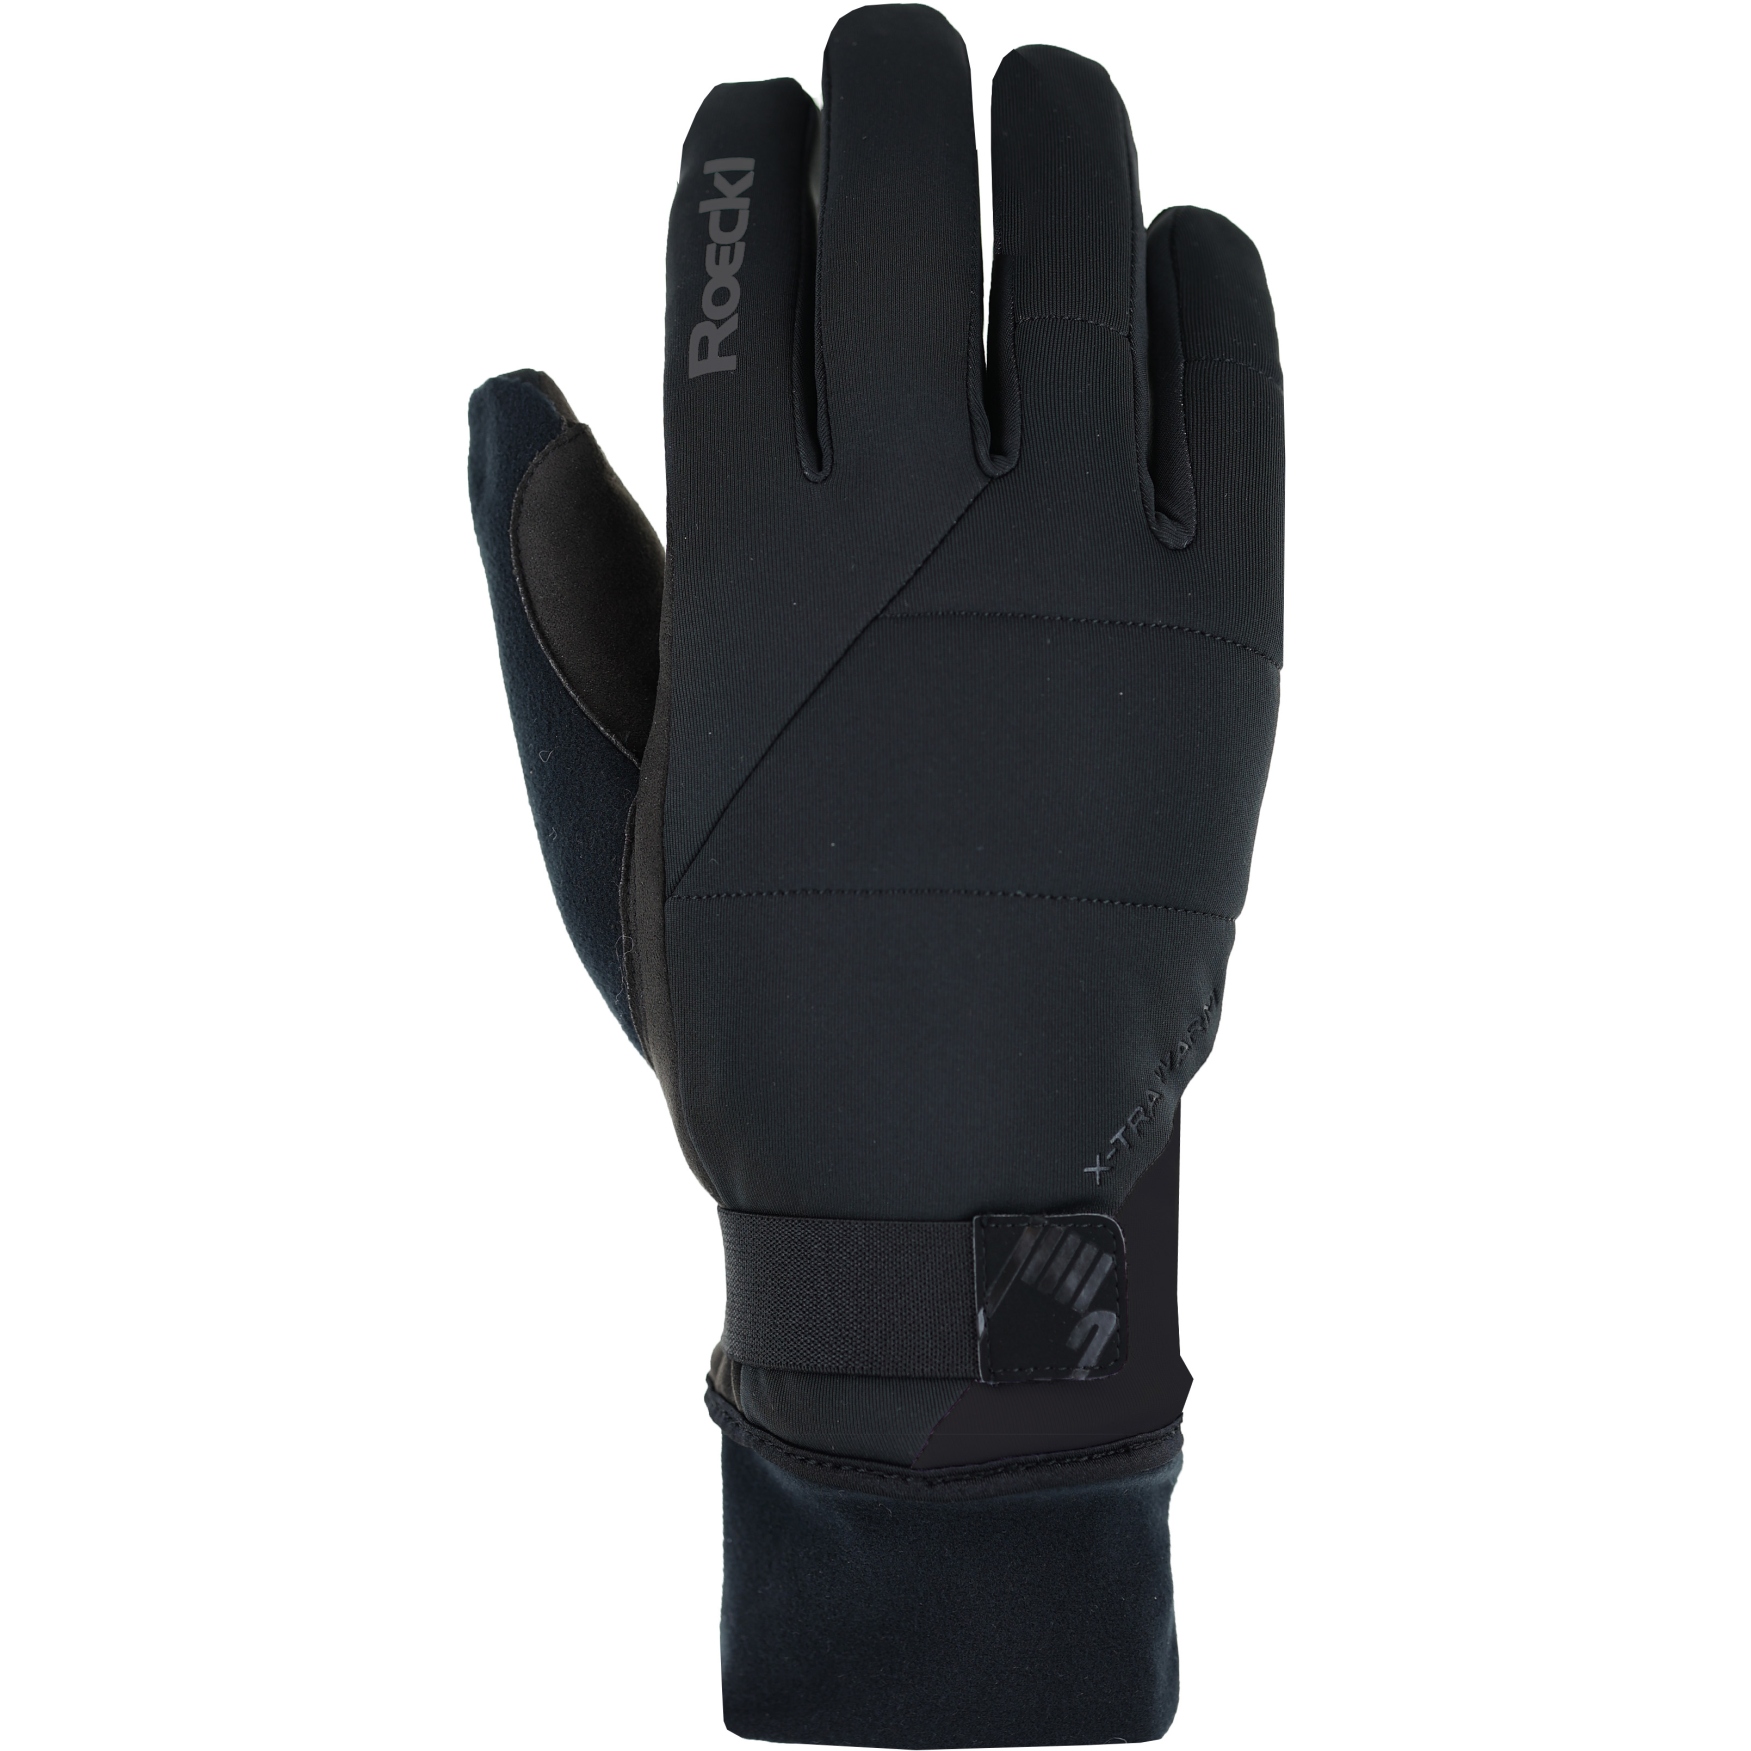 Picture of Roeckl Sports Tulfes Winter Gloves - black 9000